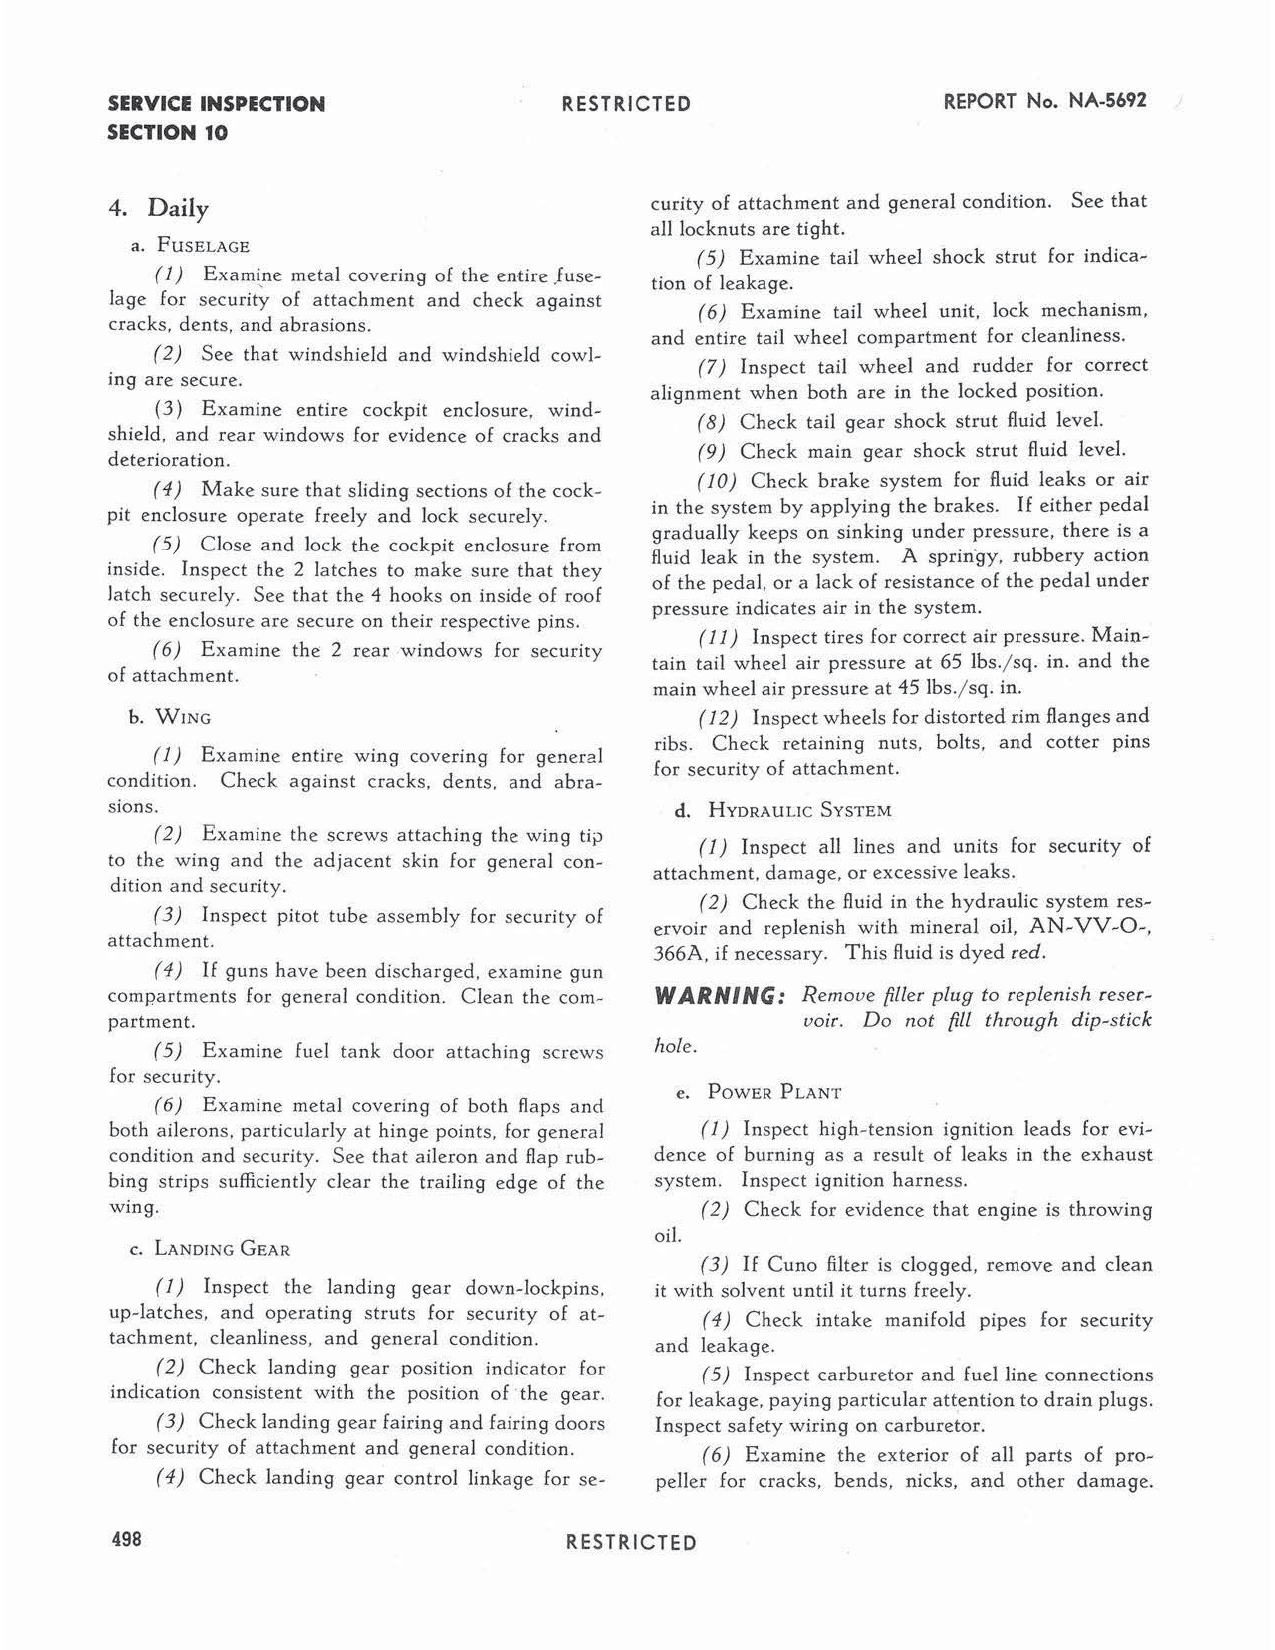 Sample page 514 from AirCorps Library document: Maintenance Manual - P-51B & P-51C